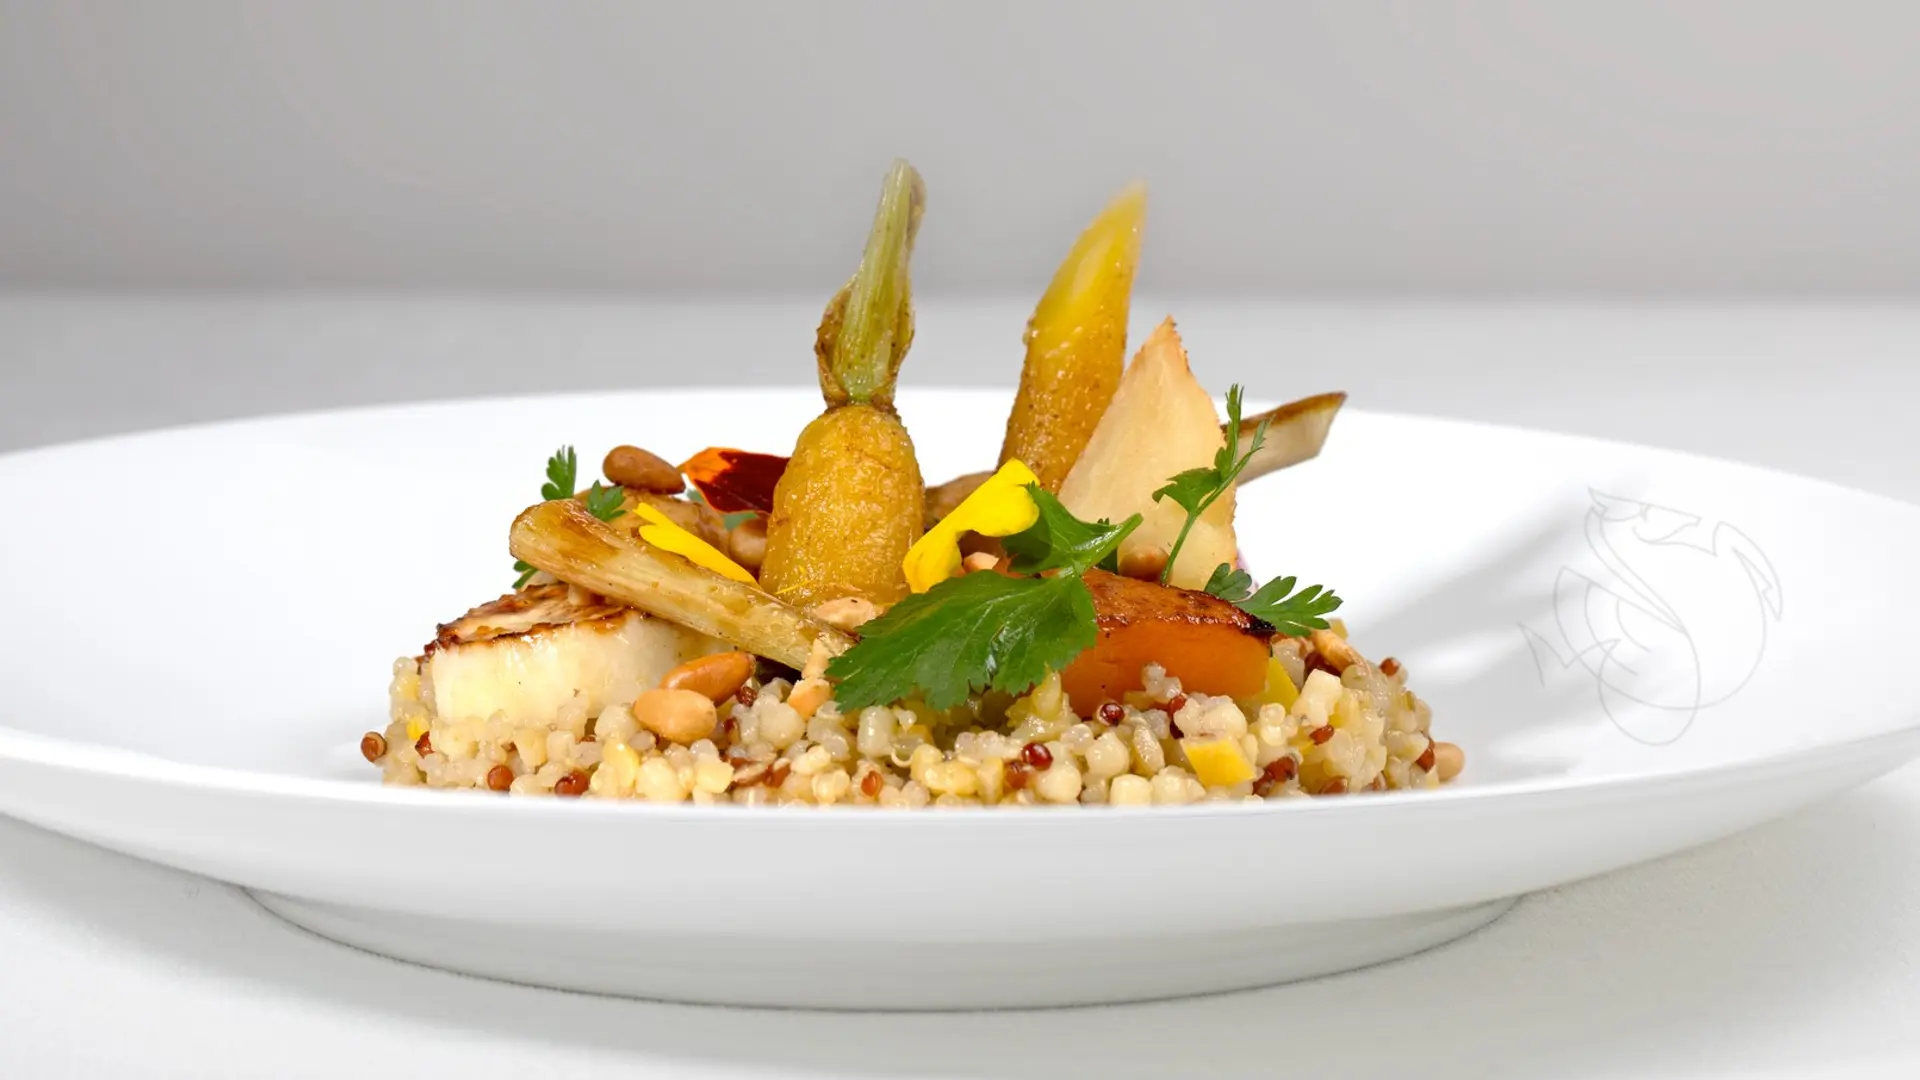 Airlines News - Air France unveils its new La Première menu from Michelin-starred chef Arnaud Donckele